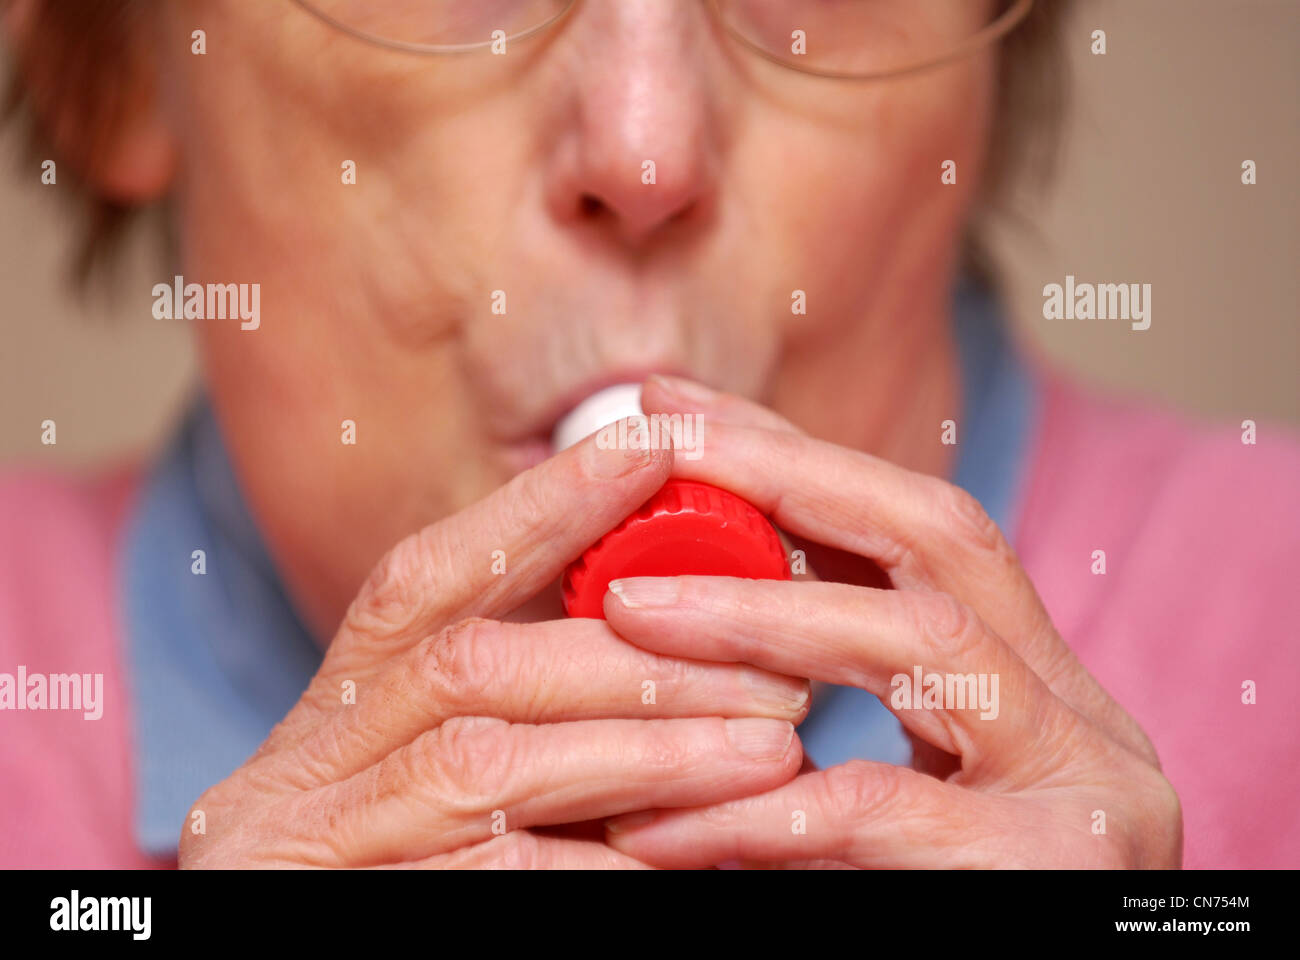 Elderly woman with asthma using inhaler to alleviate symptoms, Reading, Berkshire, UK. Stock Photo